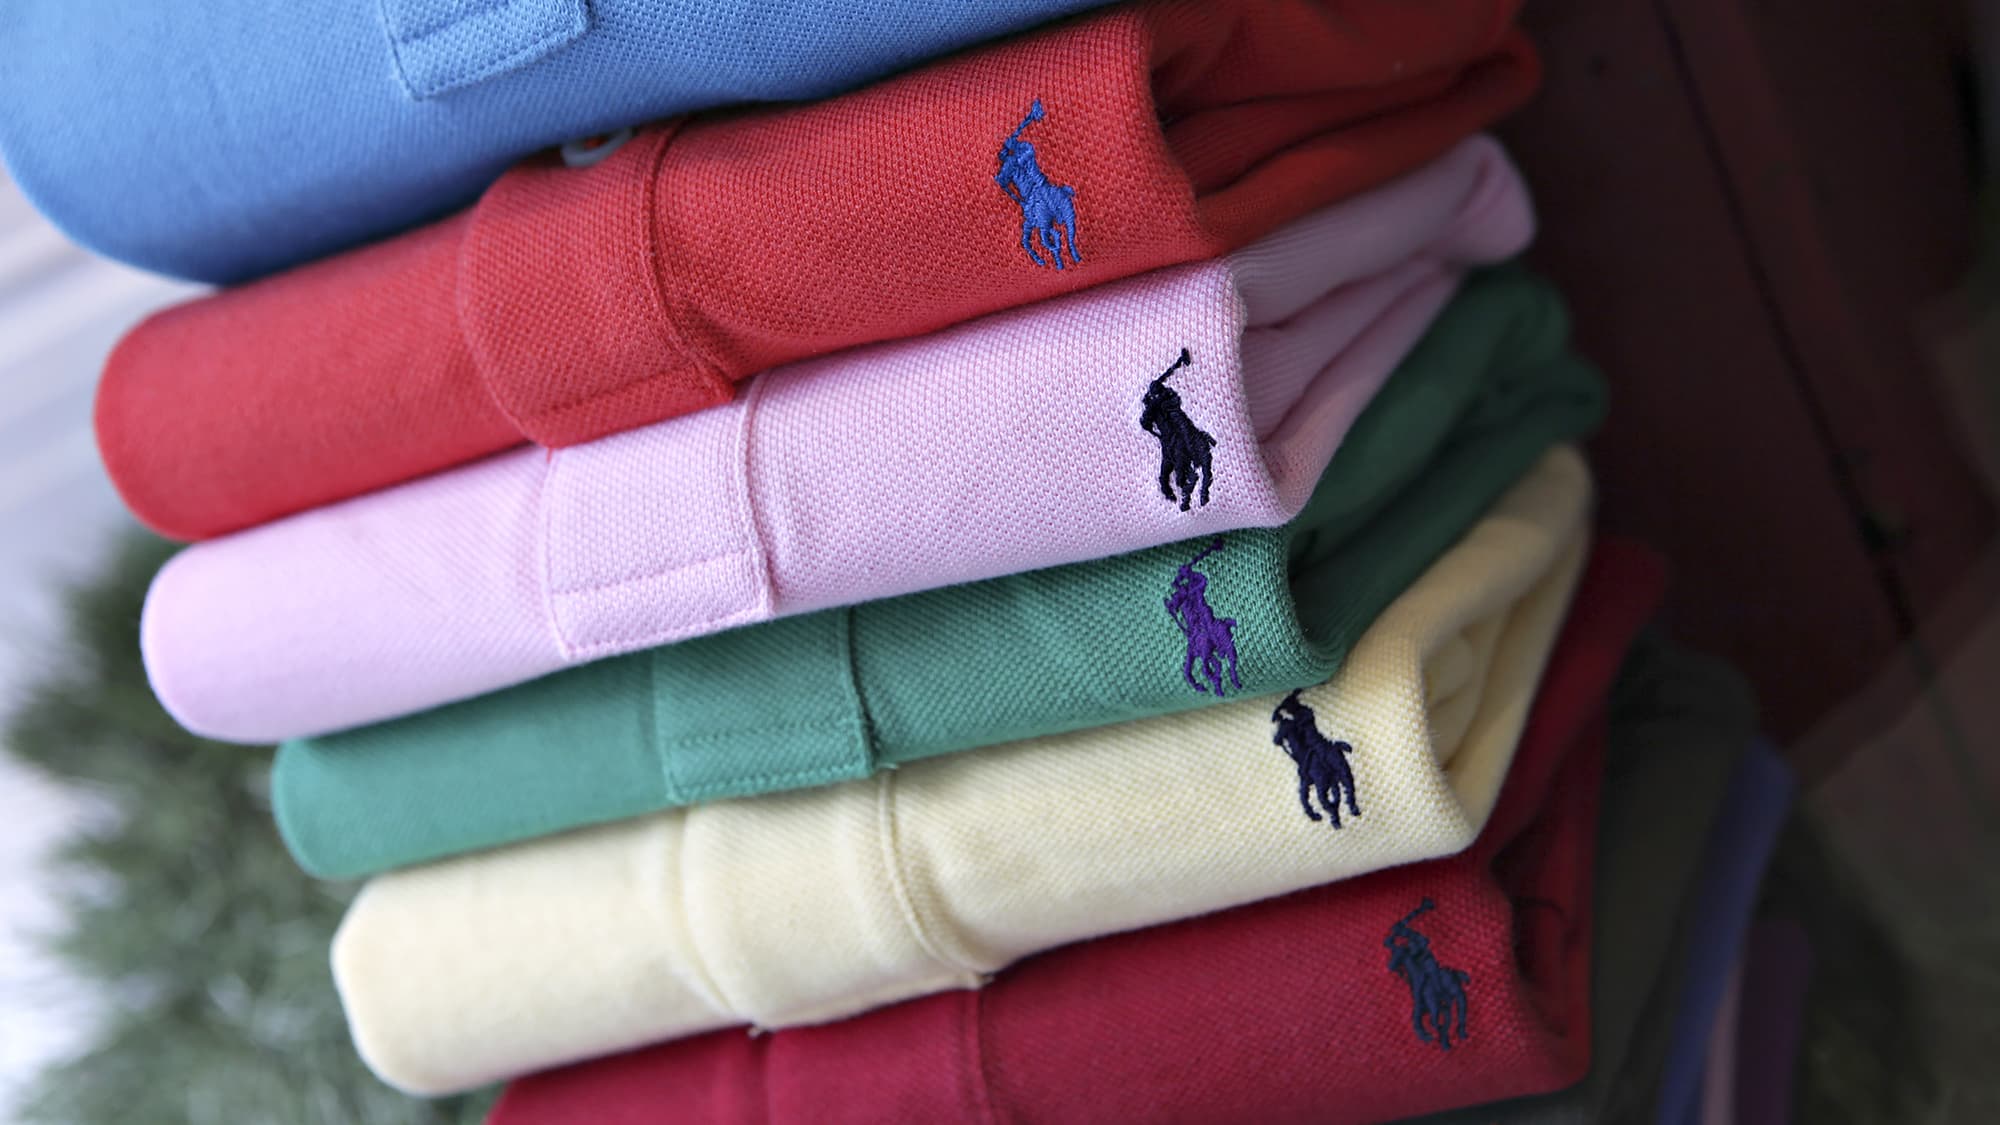 Future of Ralph Lauren and retail may be coloring clothes in store